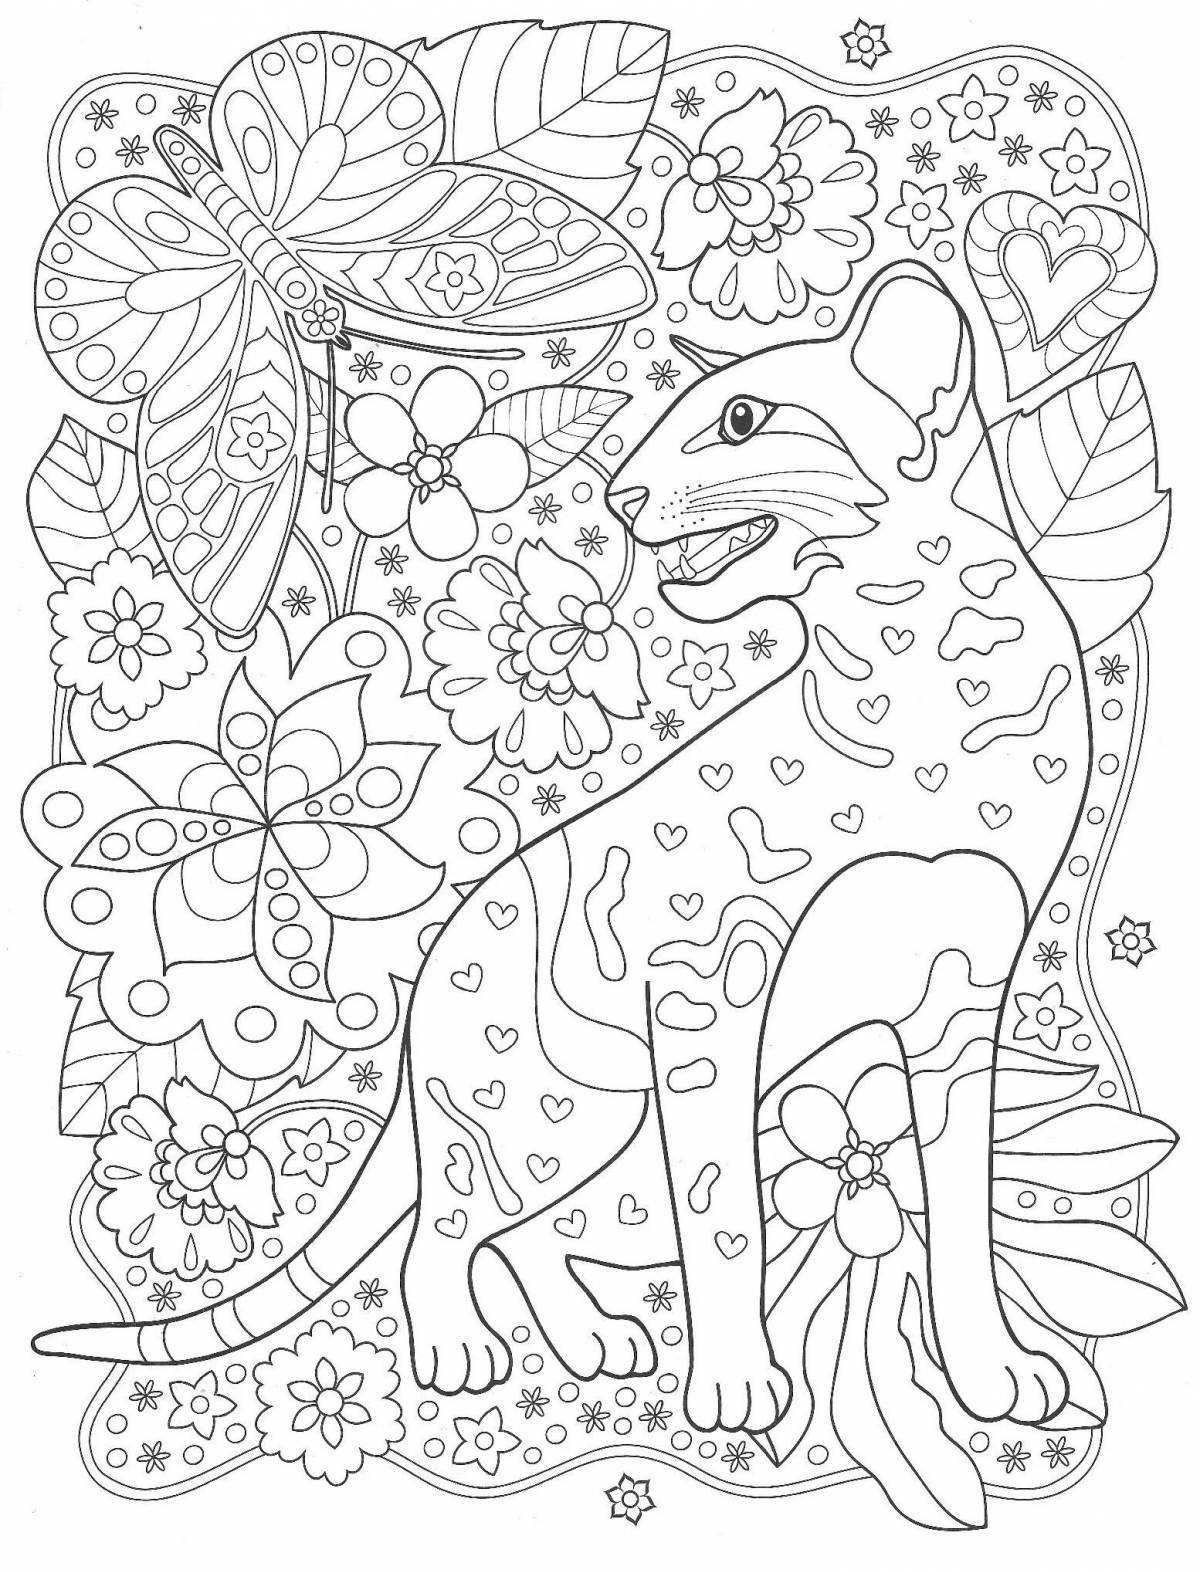 Animals antistress coloring book for girls